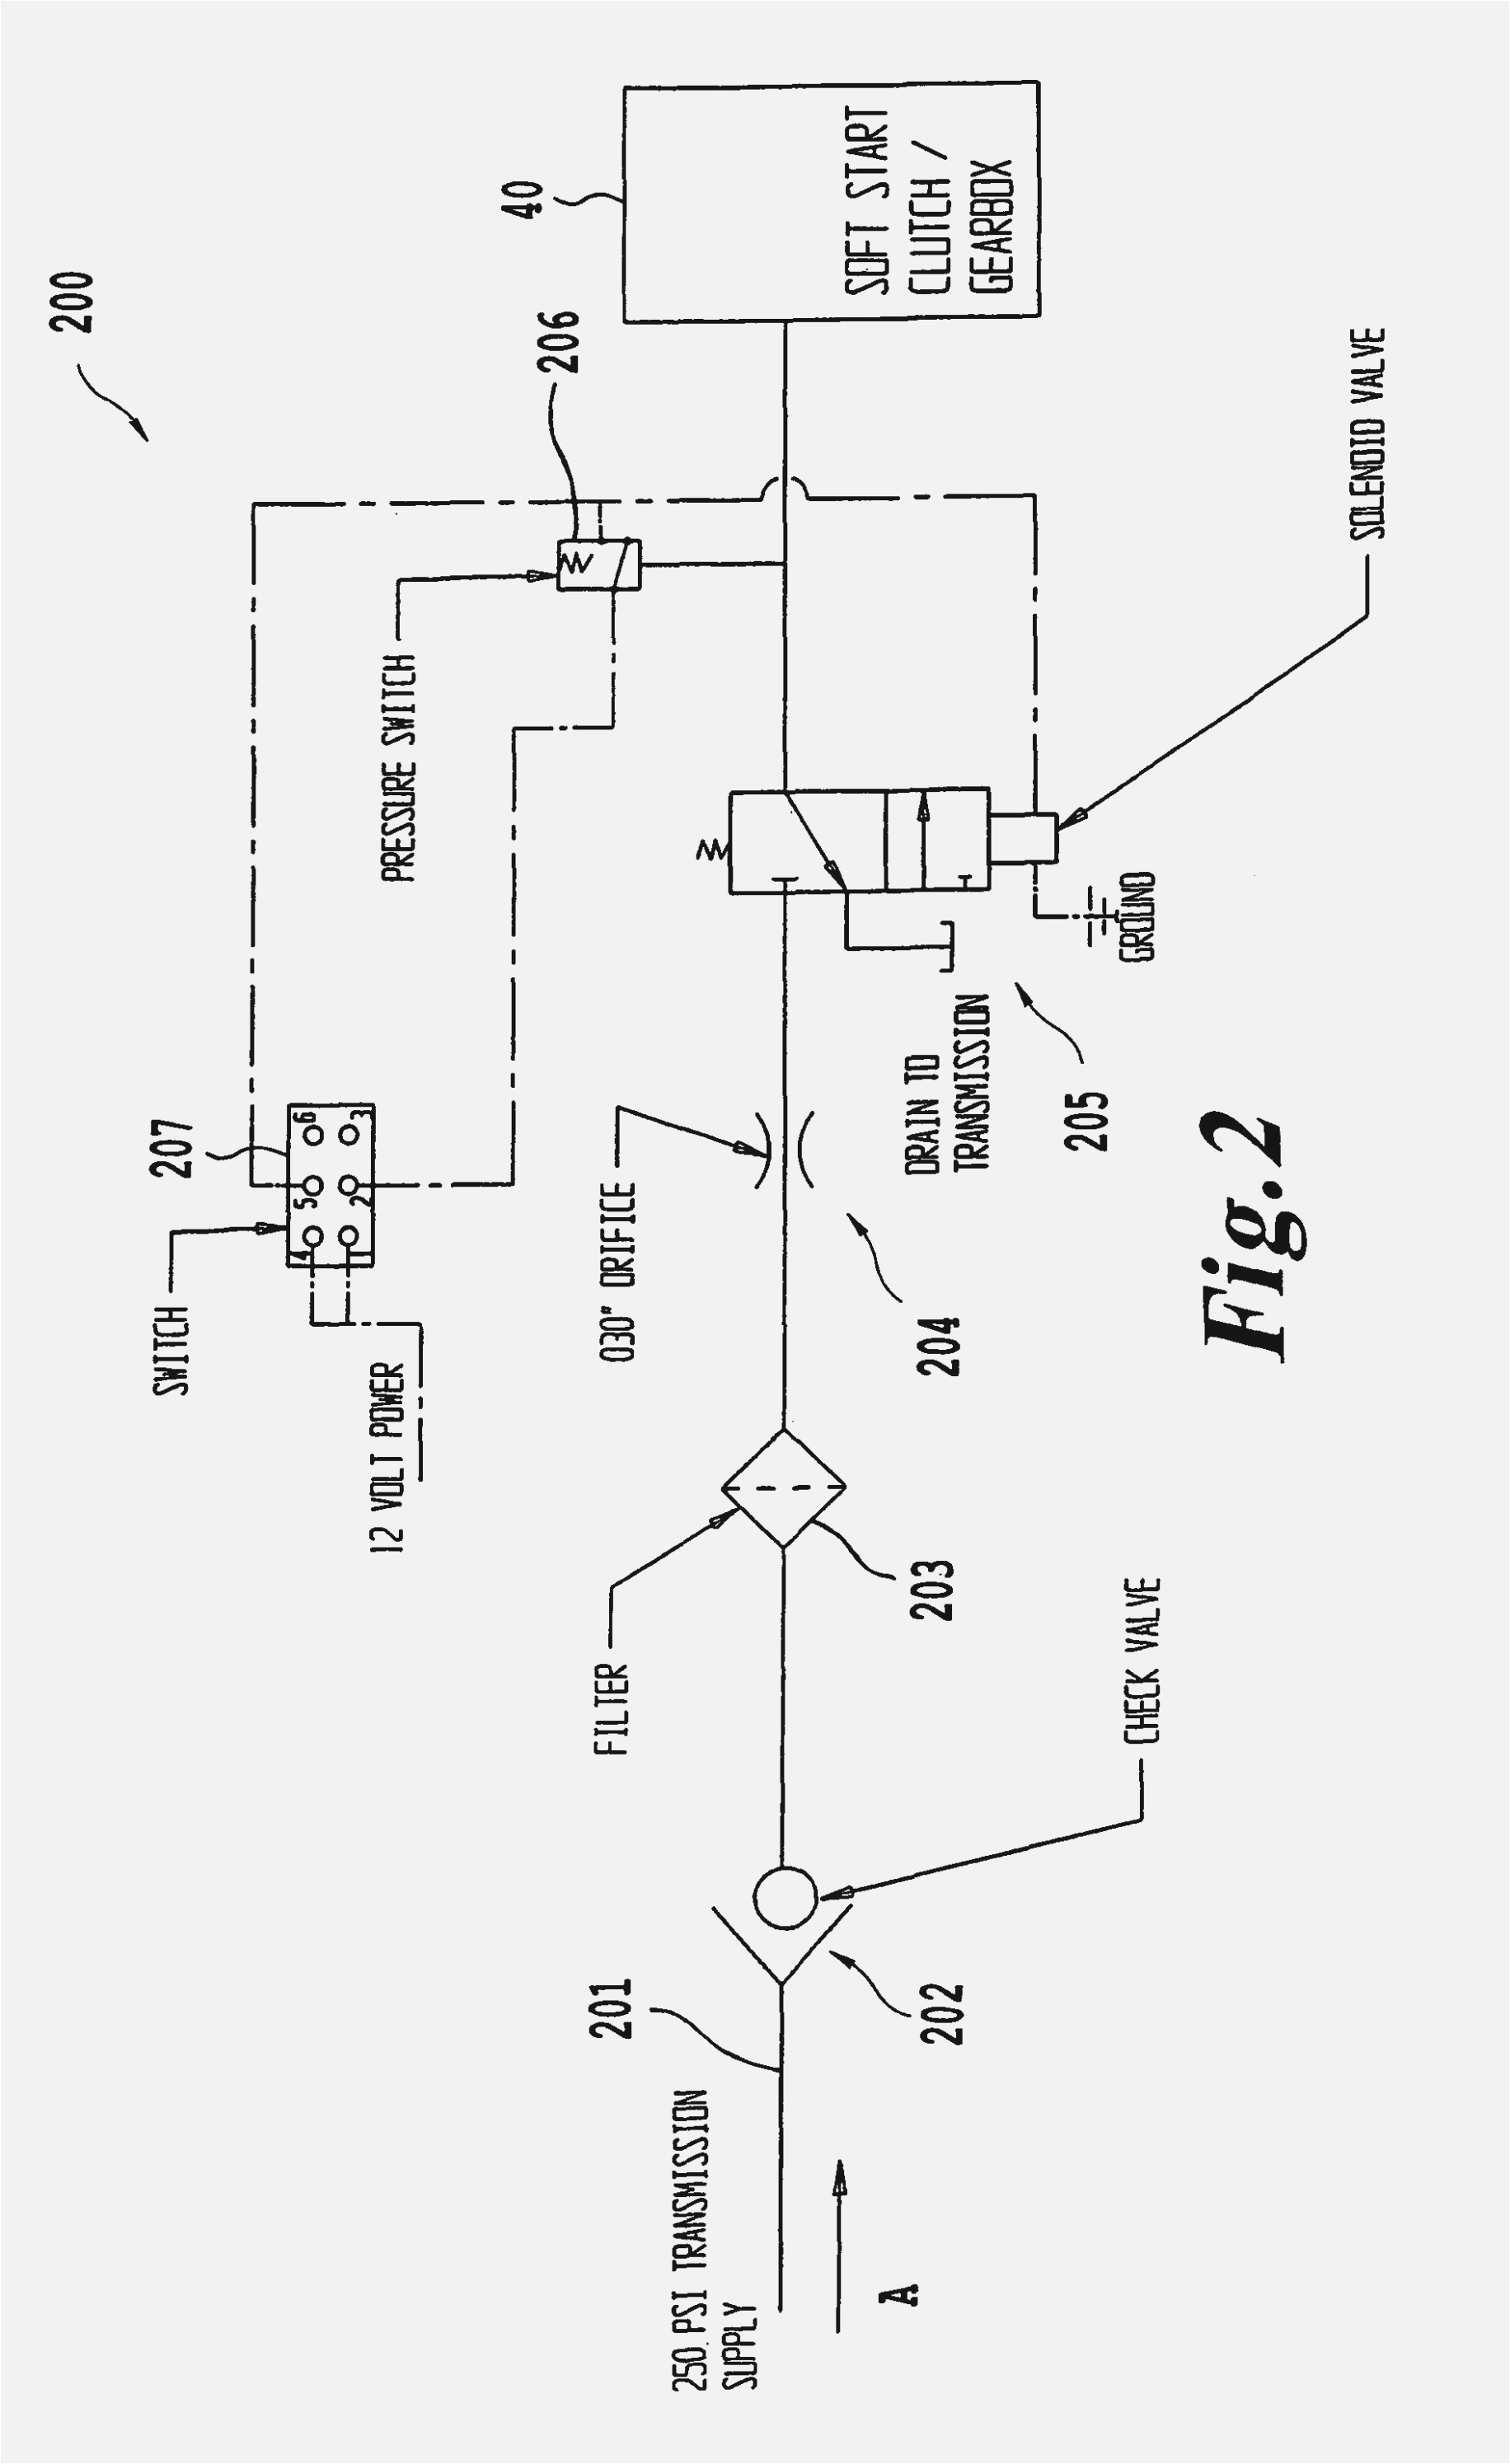 parker pto wiring diagram home wiring diagram chelsea pto wiring schematic chelsea pto wiring diagram